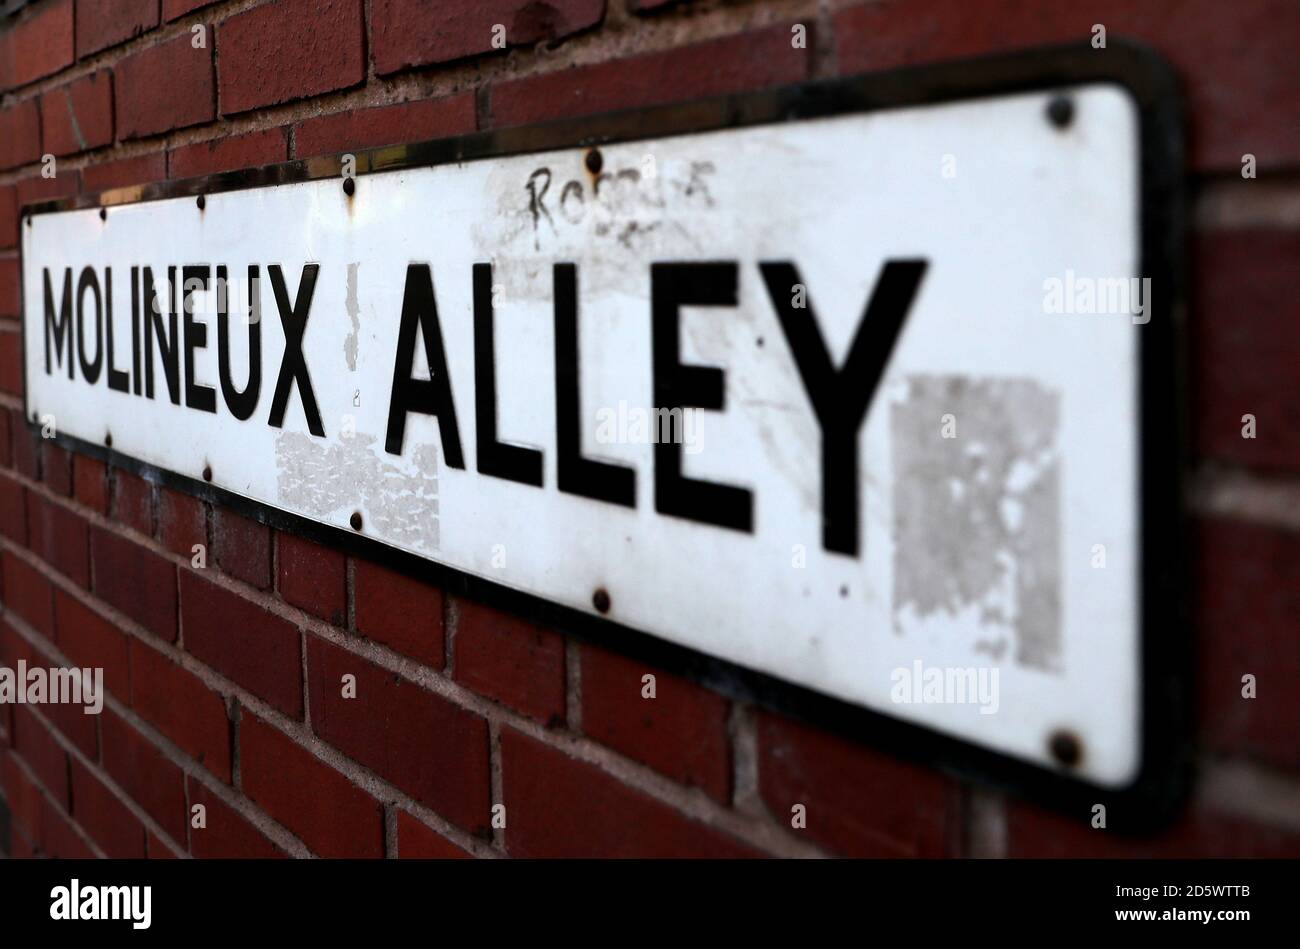 A general view of Molineux Alley road sign Stock Photo - Alamy